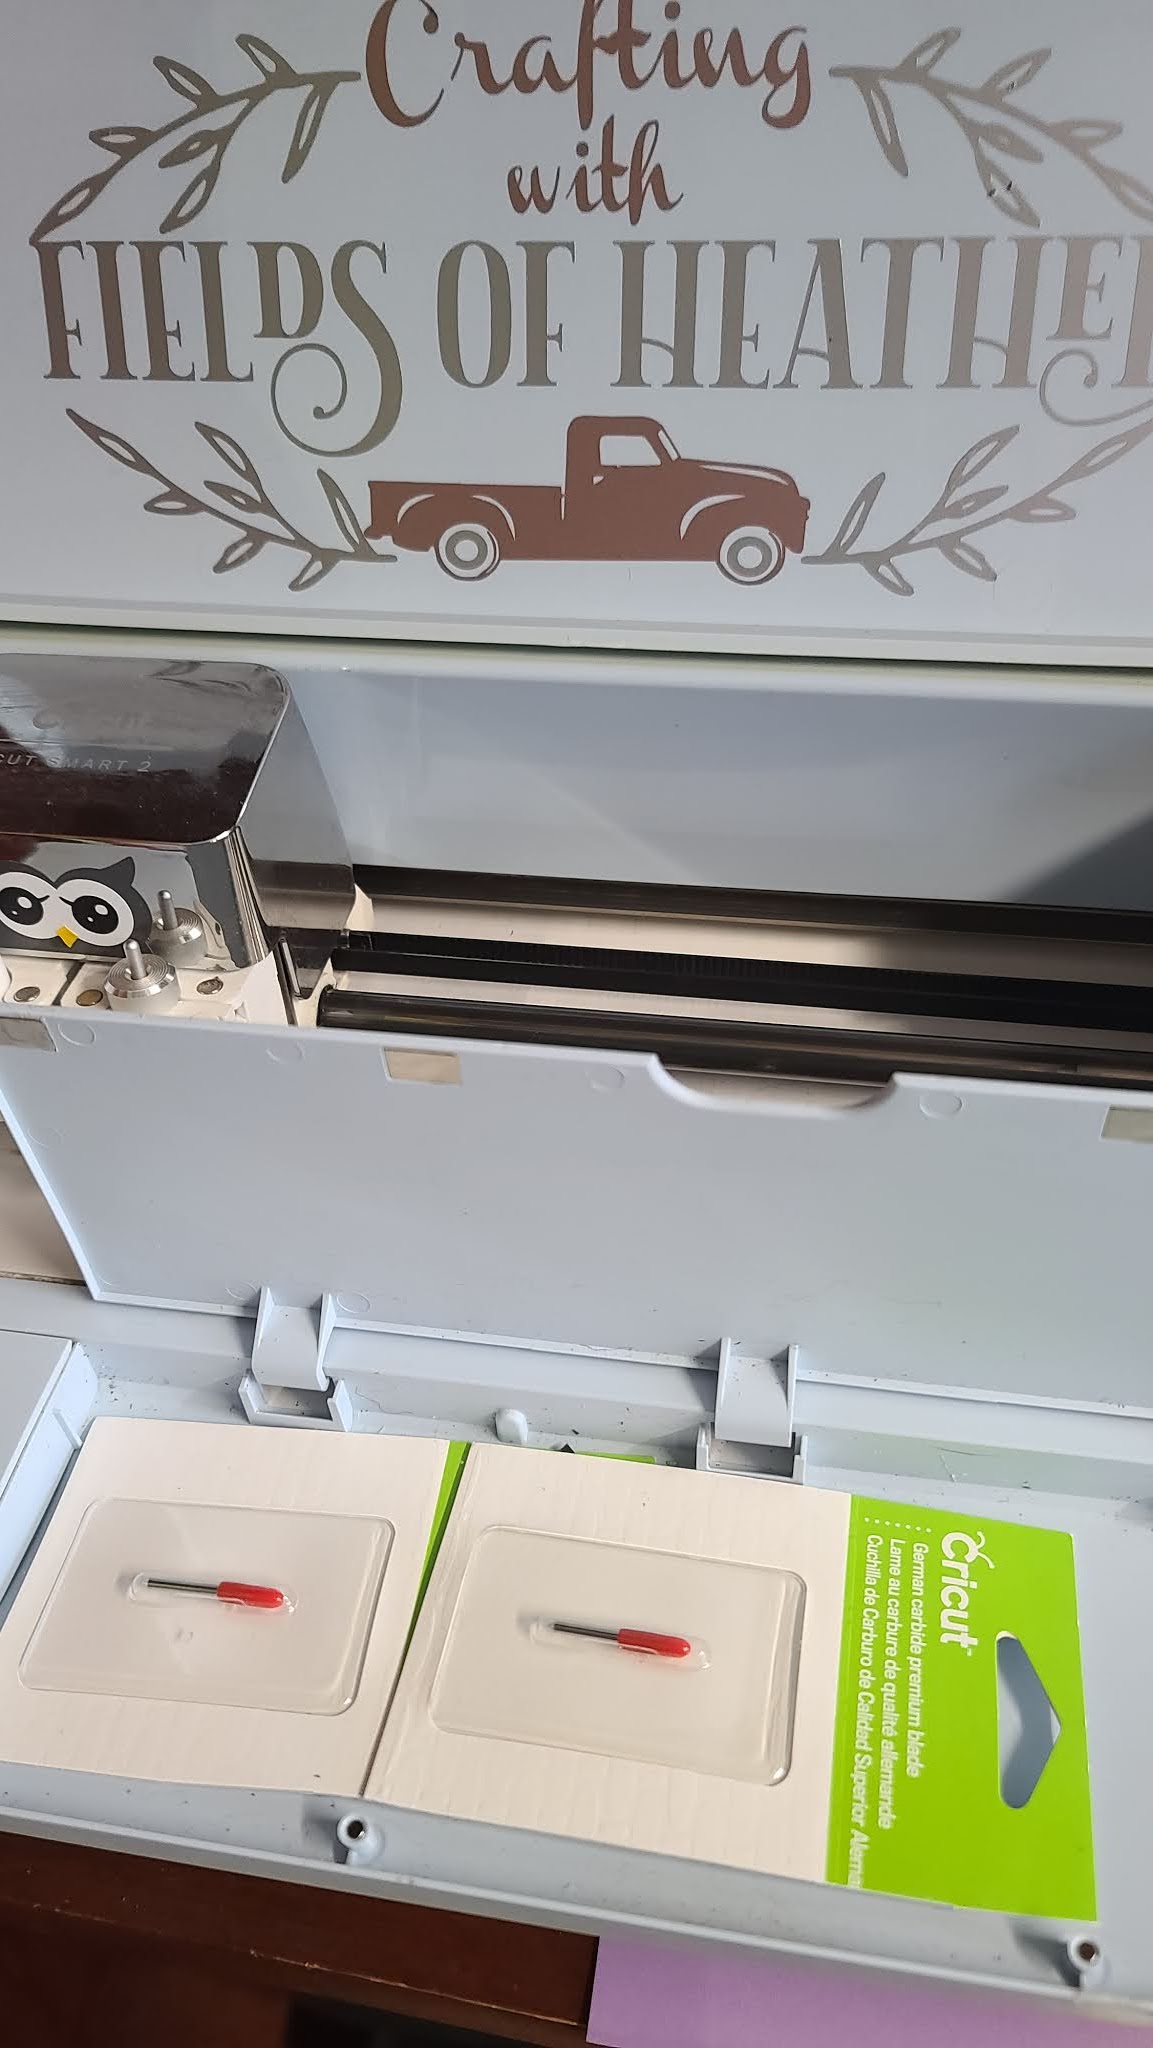 Fields Of Heather: Comparing Off Brand Blades To The Cricut Original Blade